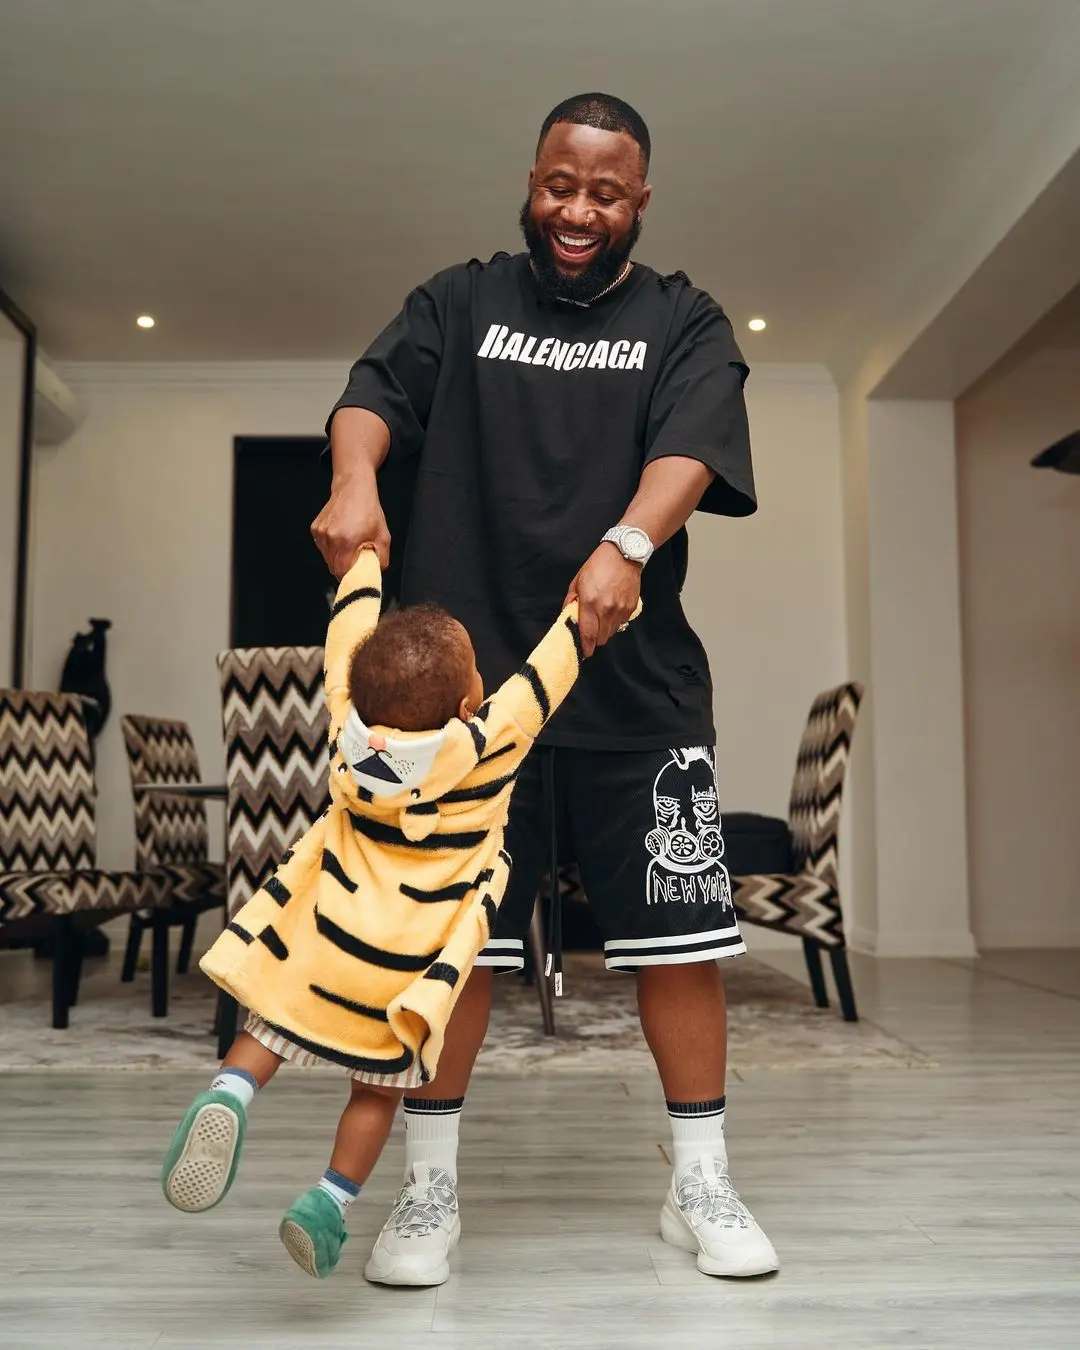 PHOTO: Cassper Nyovest gets tattoo of his baby, Khotso’s face on his leg